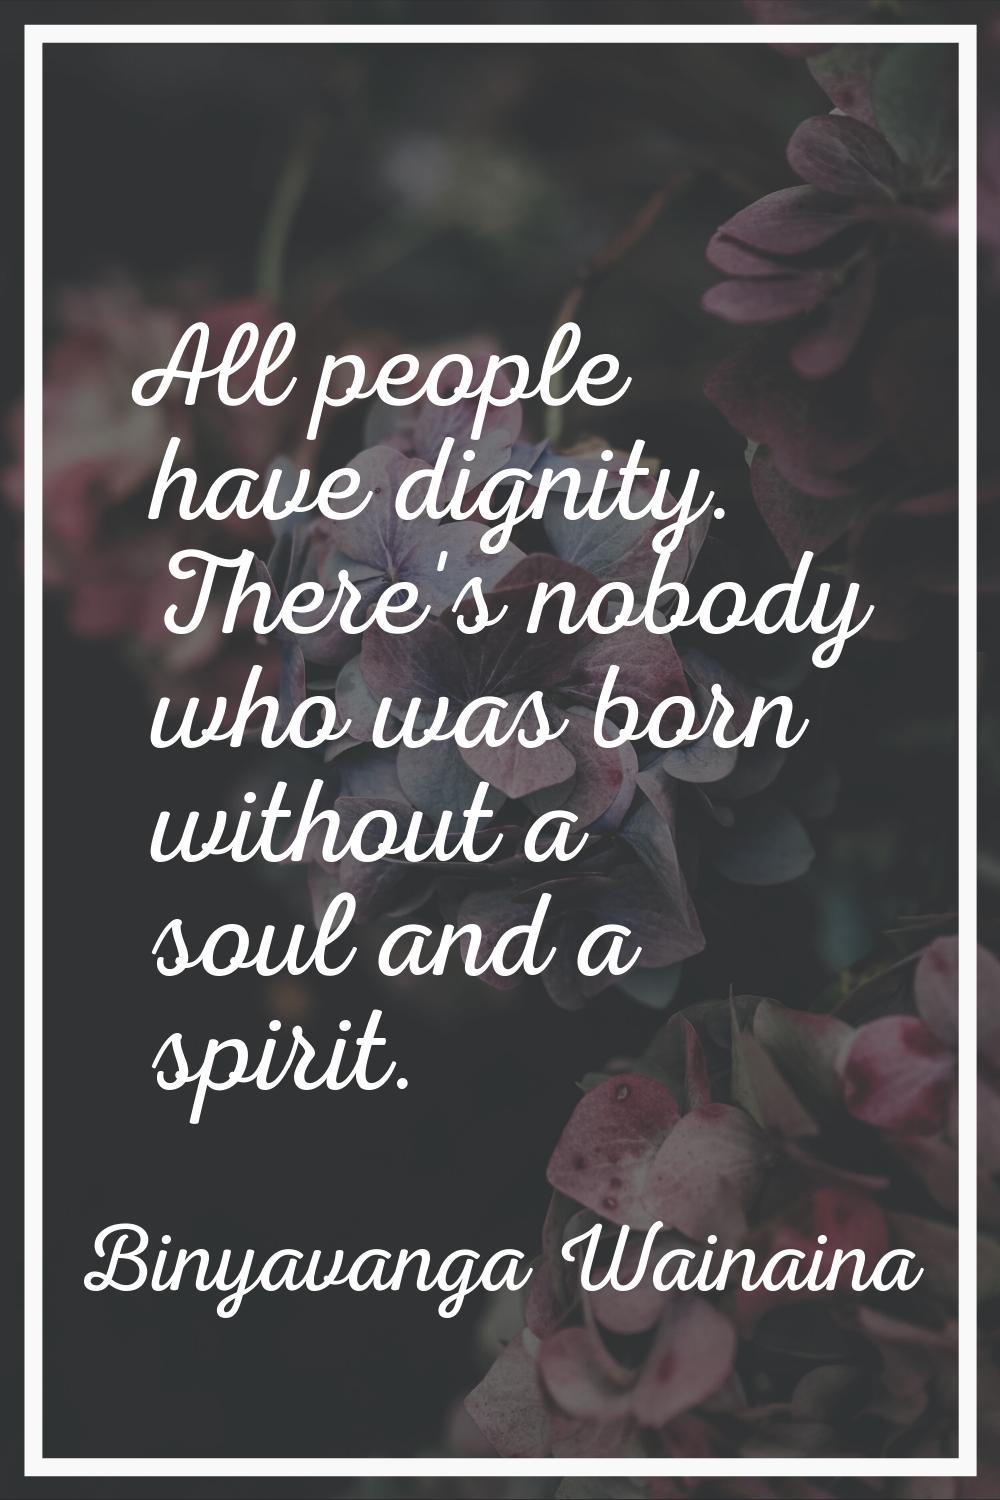 All people have dignity. There's nobody who was born without a soul and a spirit.